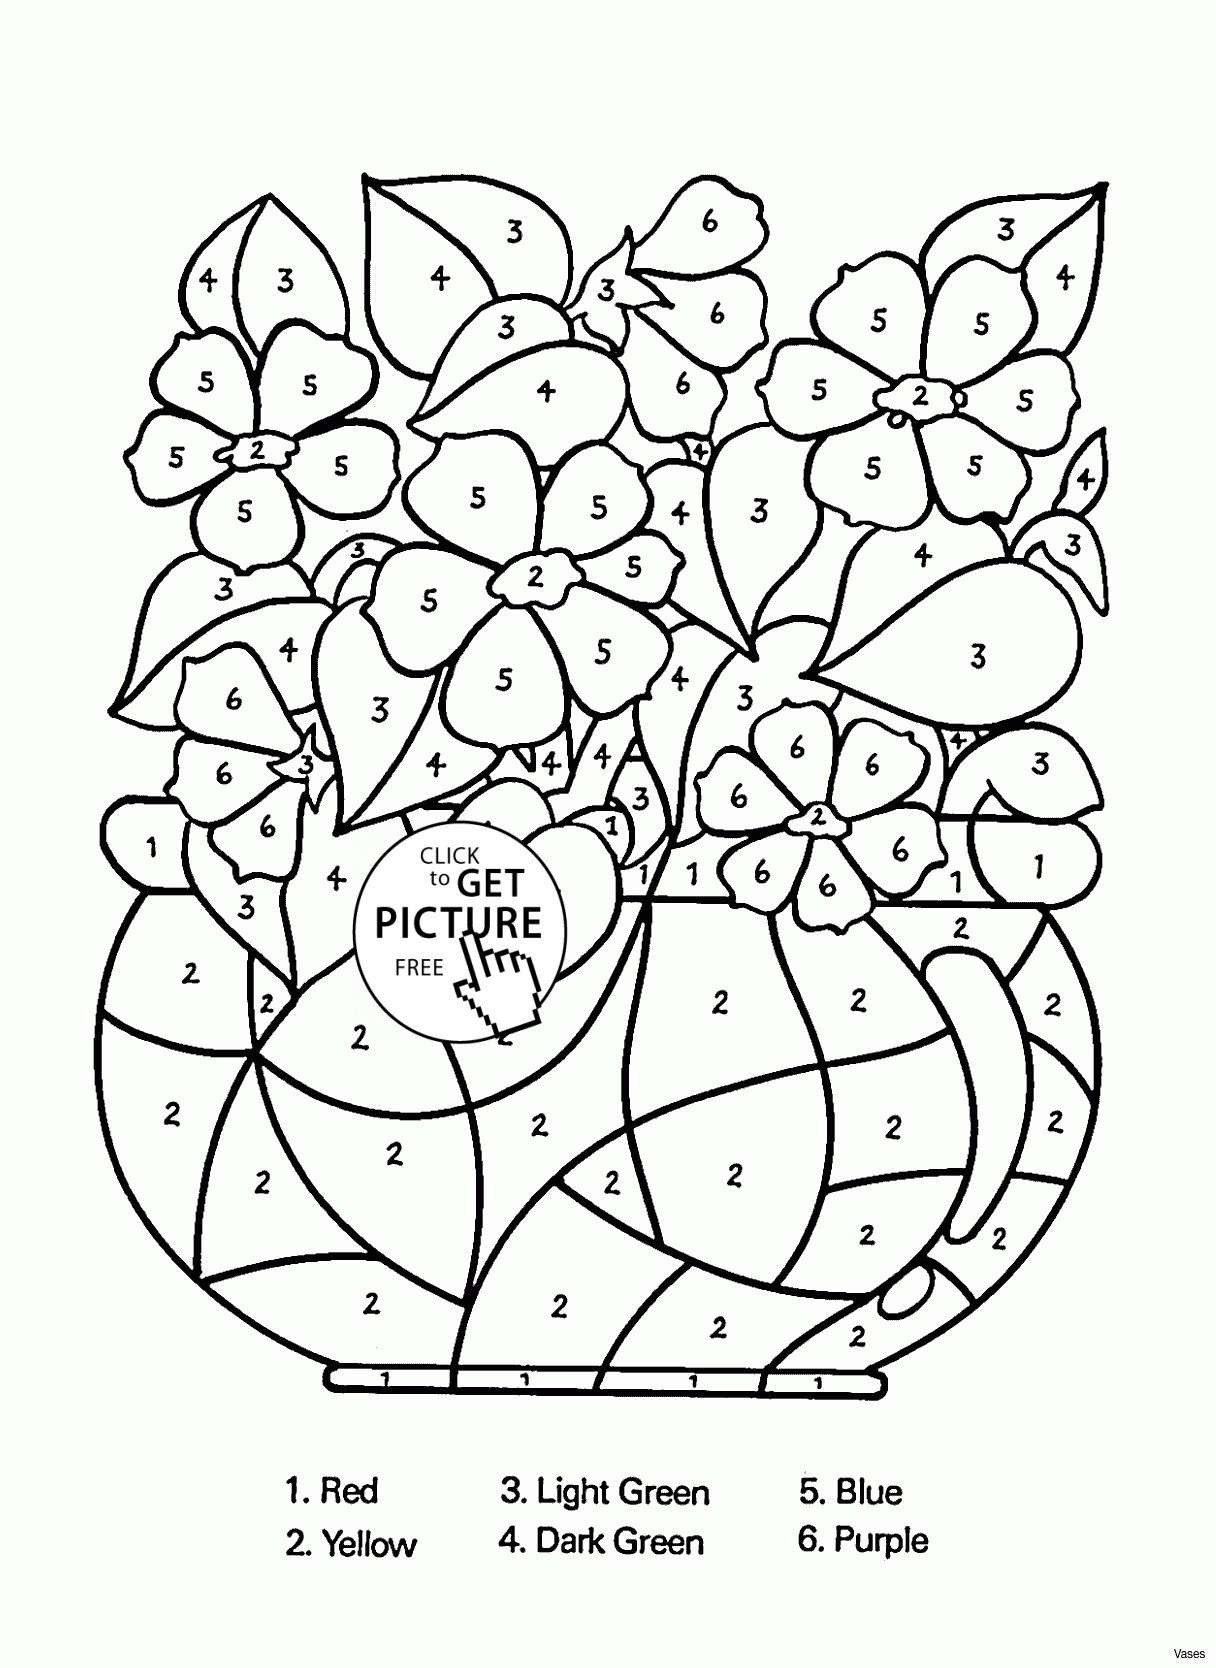 cat-in-the-hat-coloring-page-the-cat-in-the-hat-coloring-pages